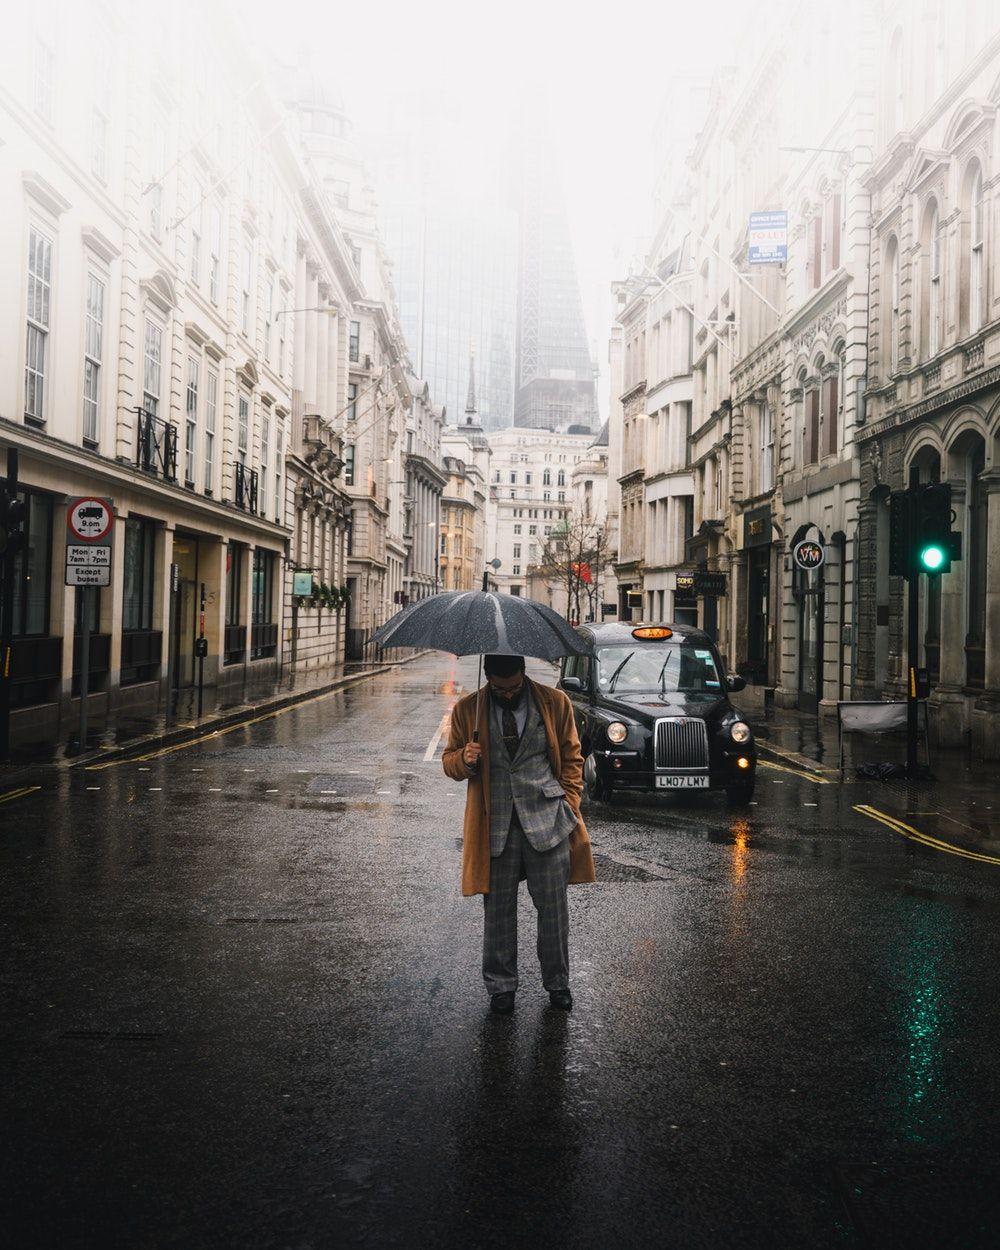 Rainy Street Picture. Download Free Image